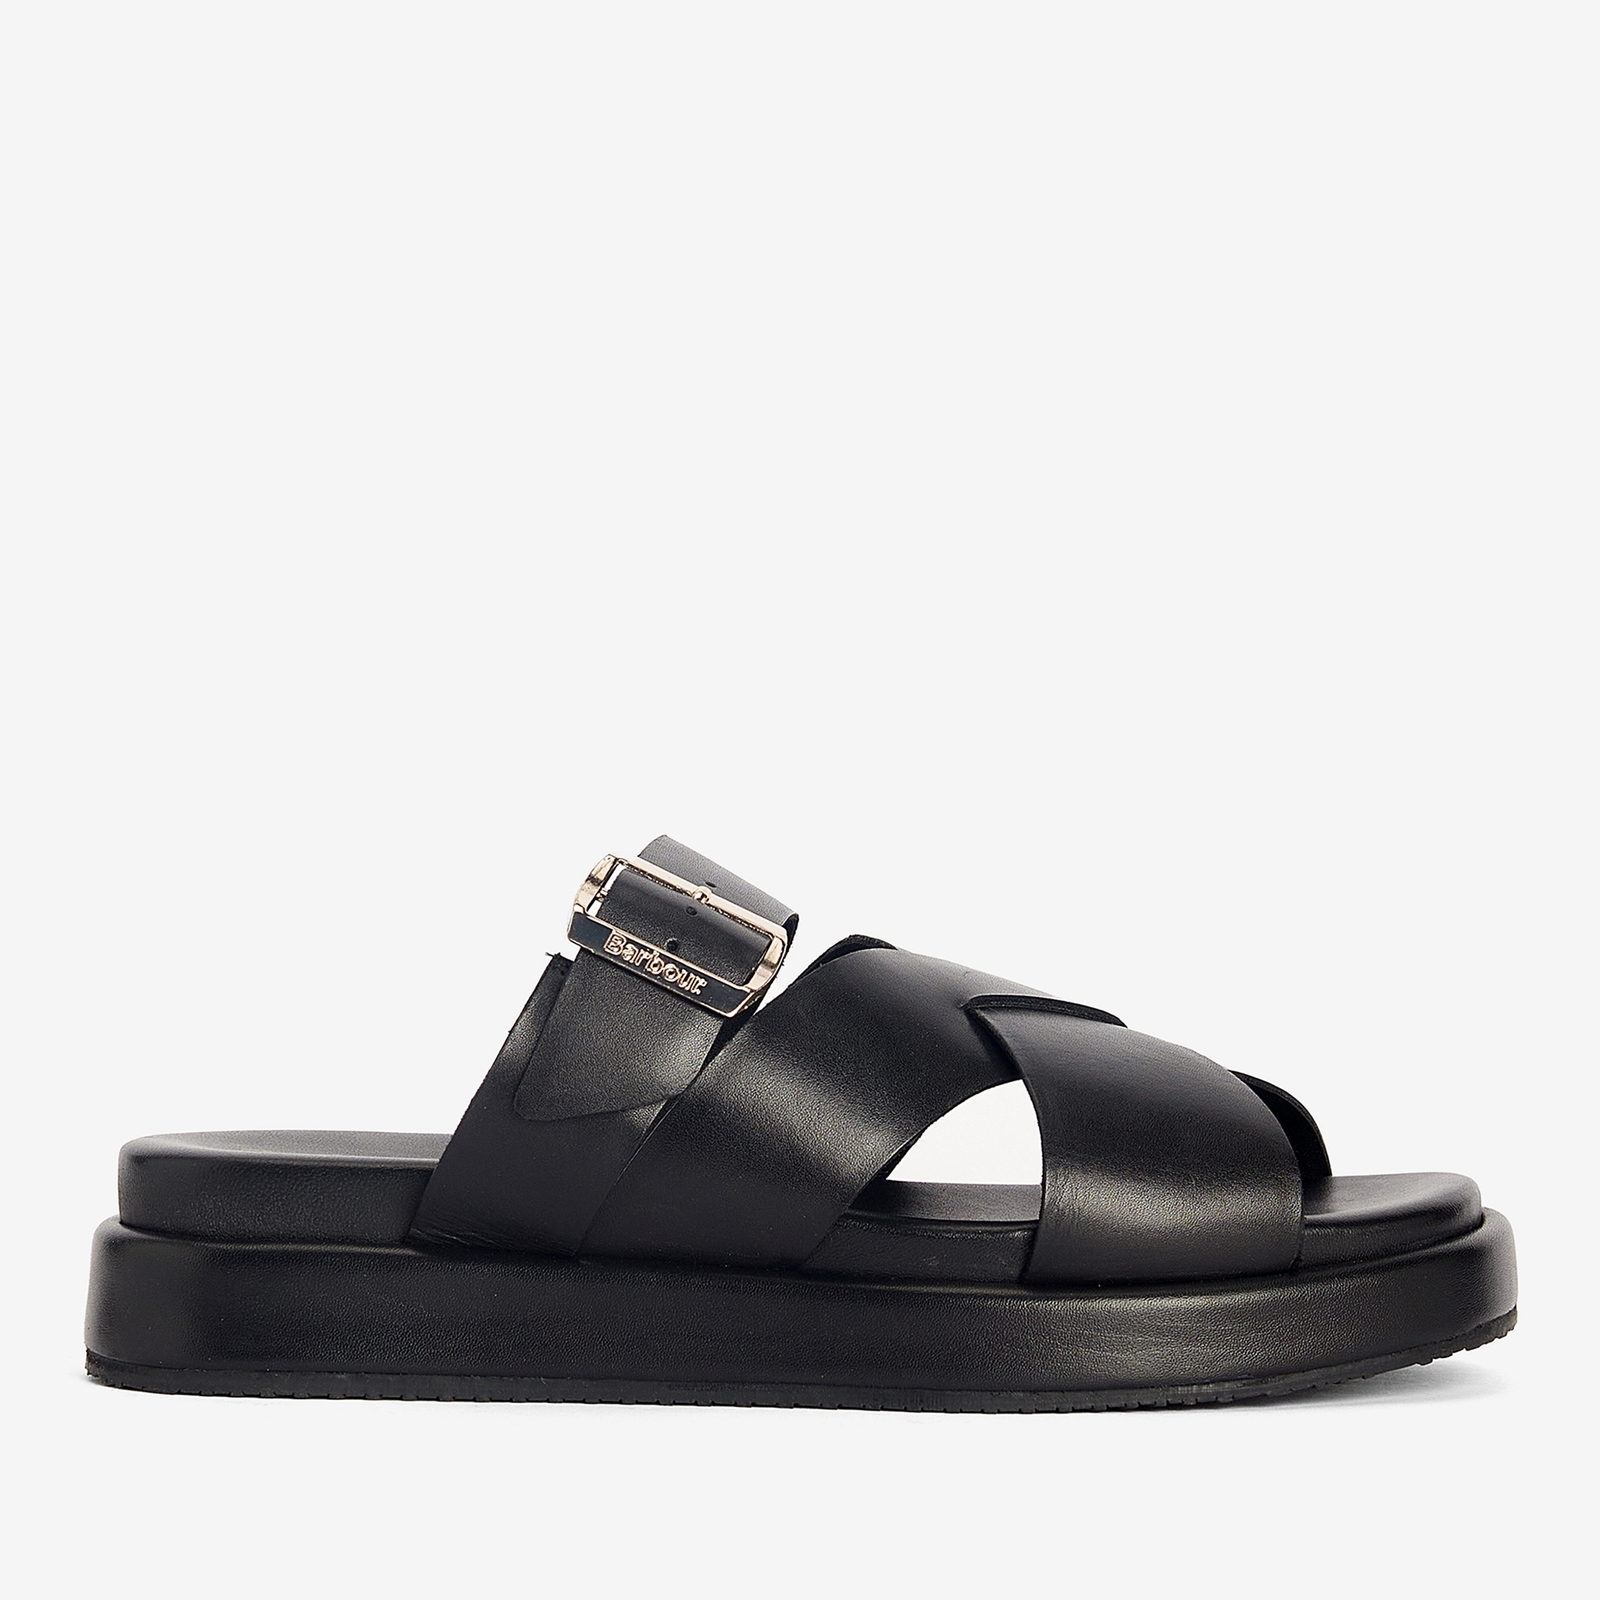 Barbour Women’s Annalise Leather Sandals